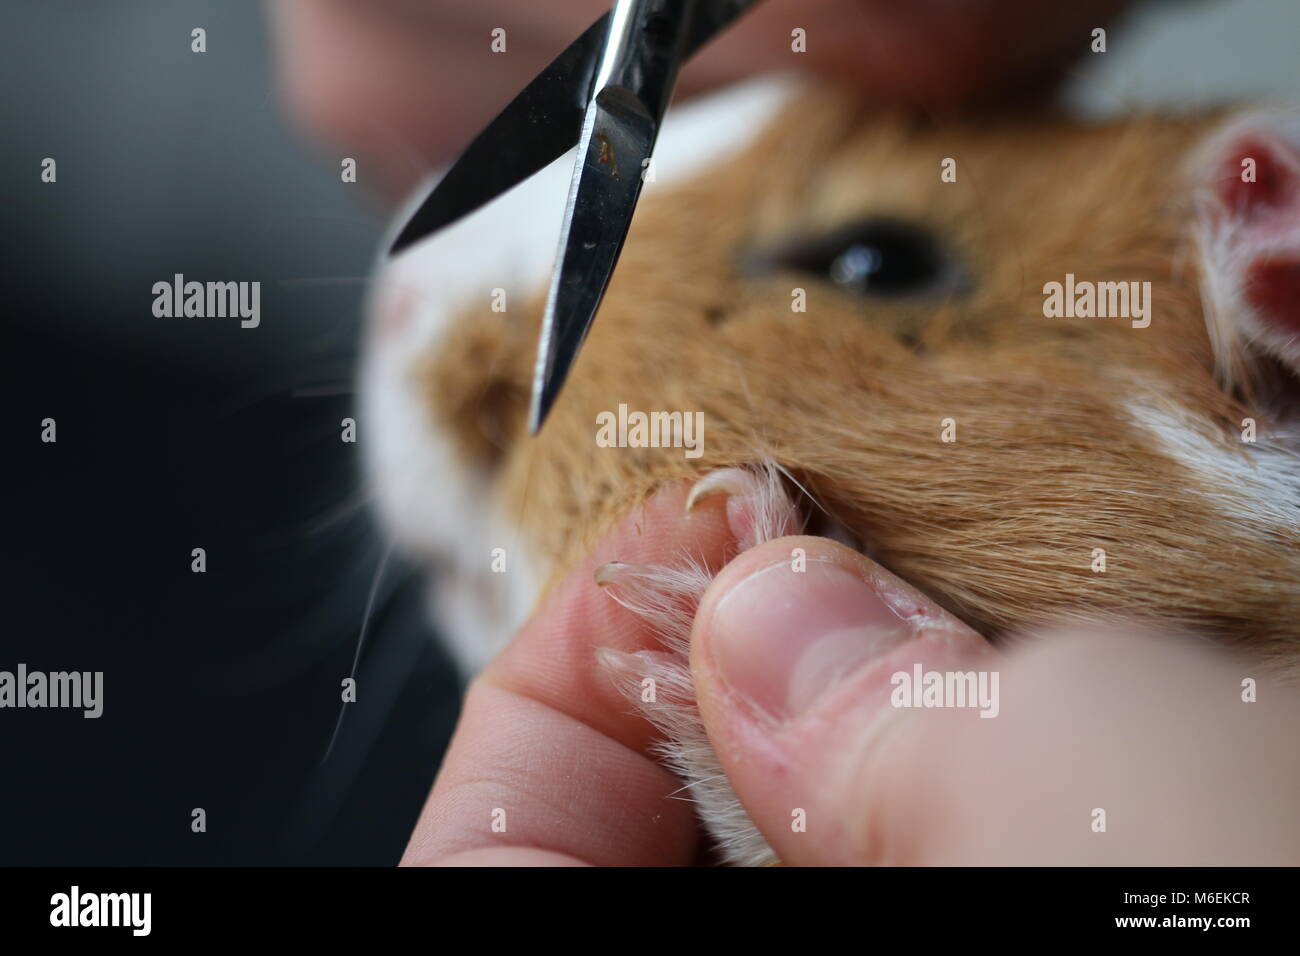 Guinea pig having its claws clipped Stock Photo